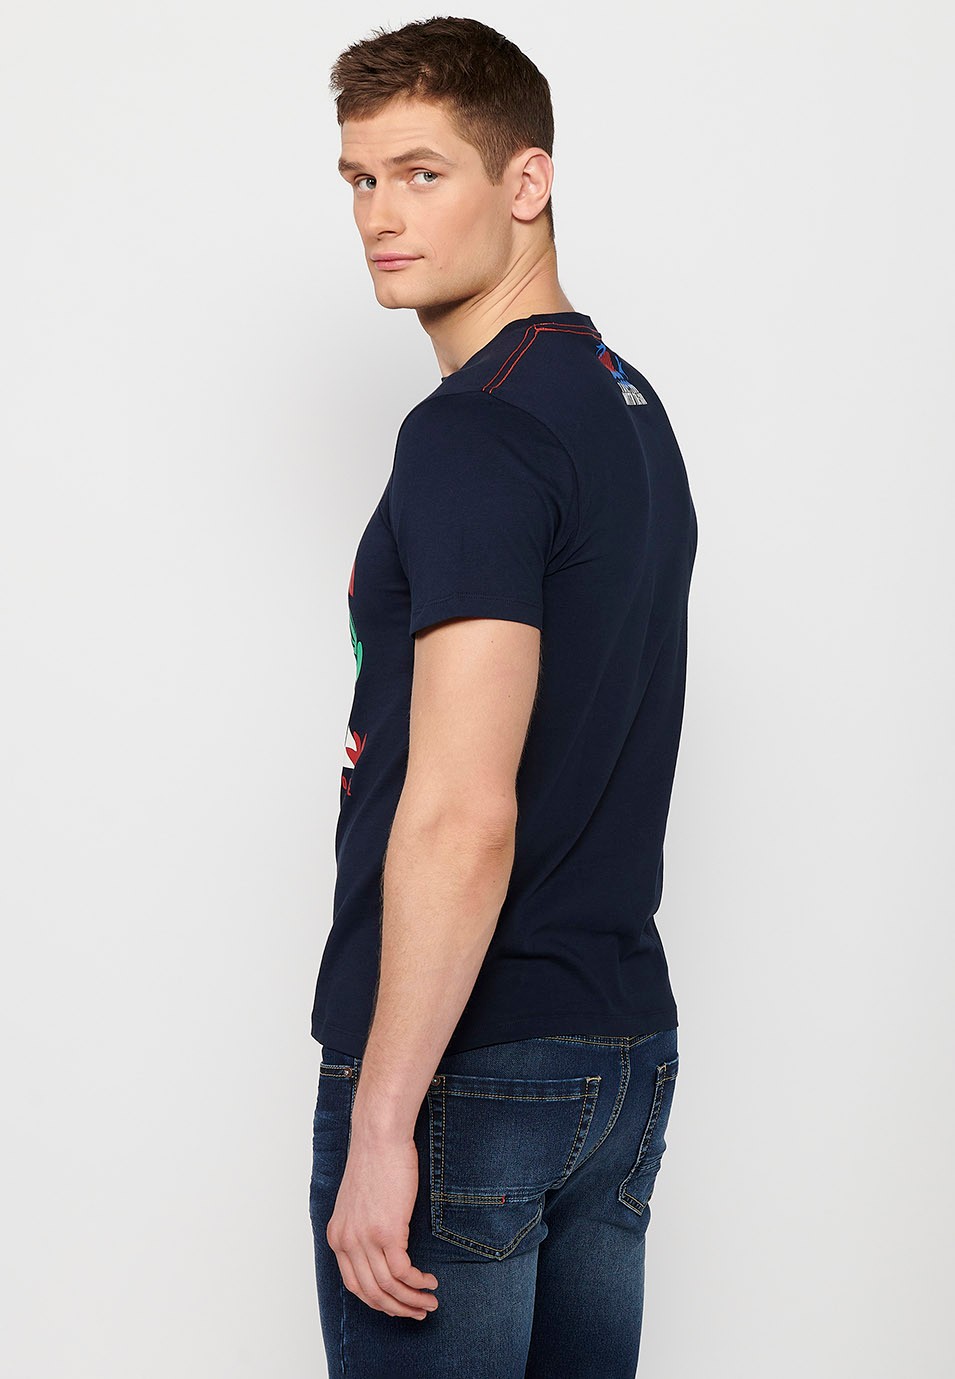 Printed short-sleeved T-shirt, round neck in navy color for men